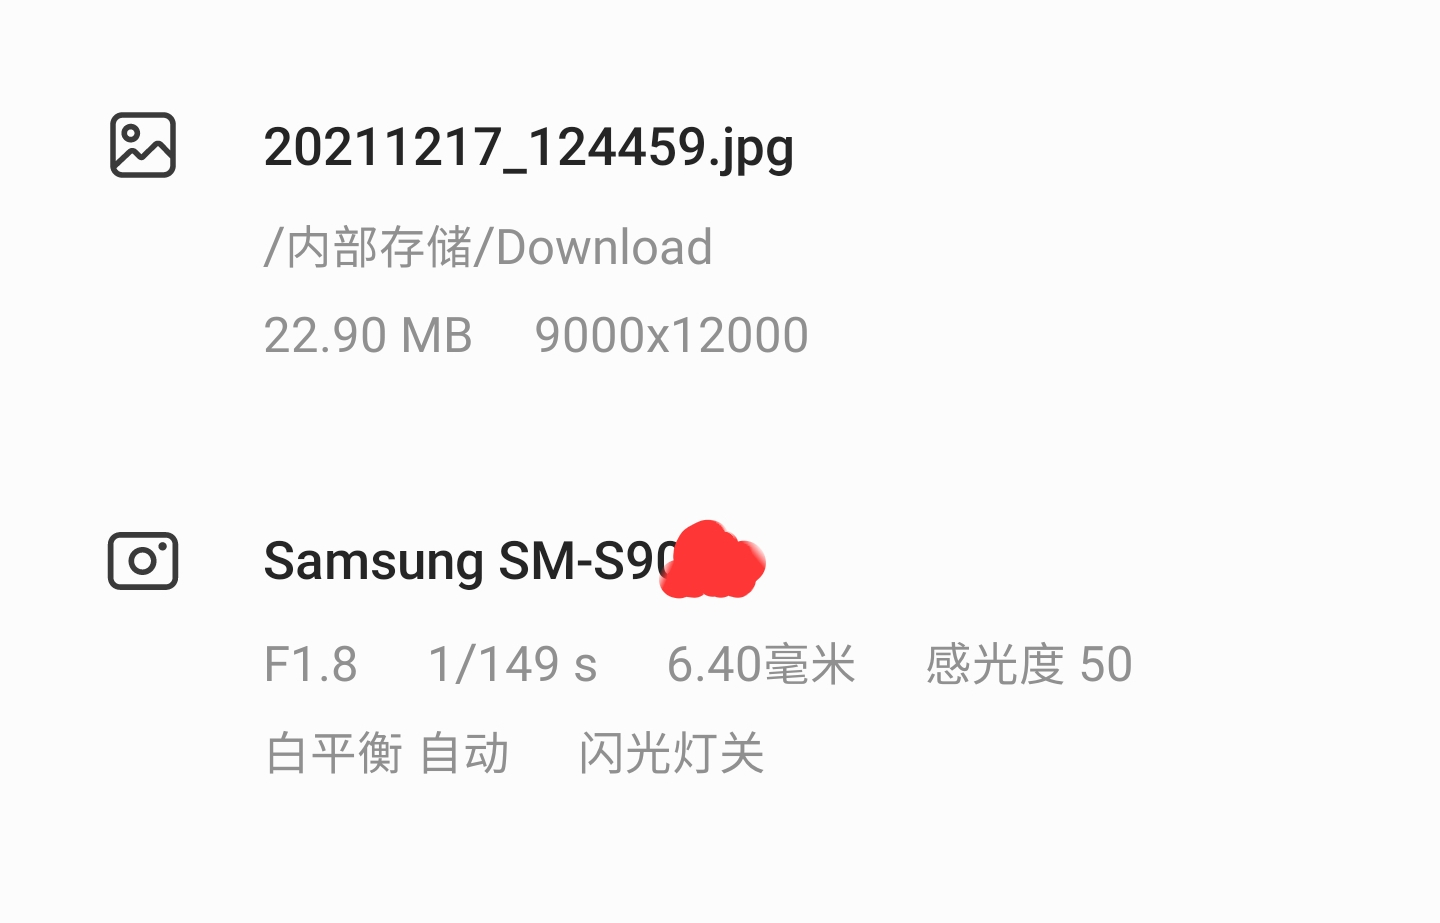 New Samsung Galaxy S22 Ultra leak points to an improved 108 MP